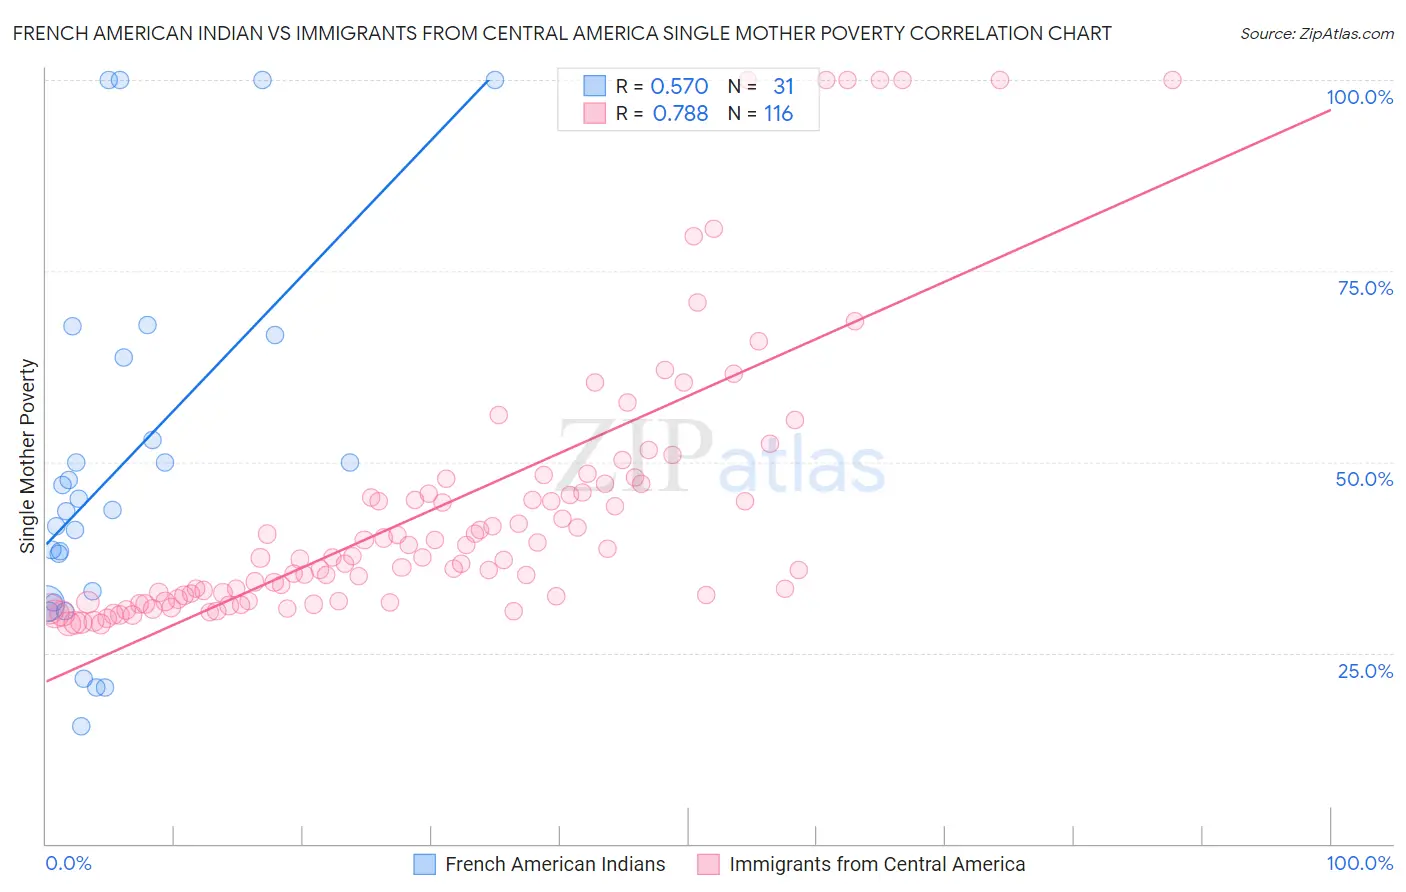 French American Indian vs Immigrants from Central America Single Mother Poverty